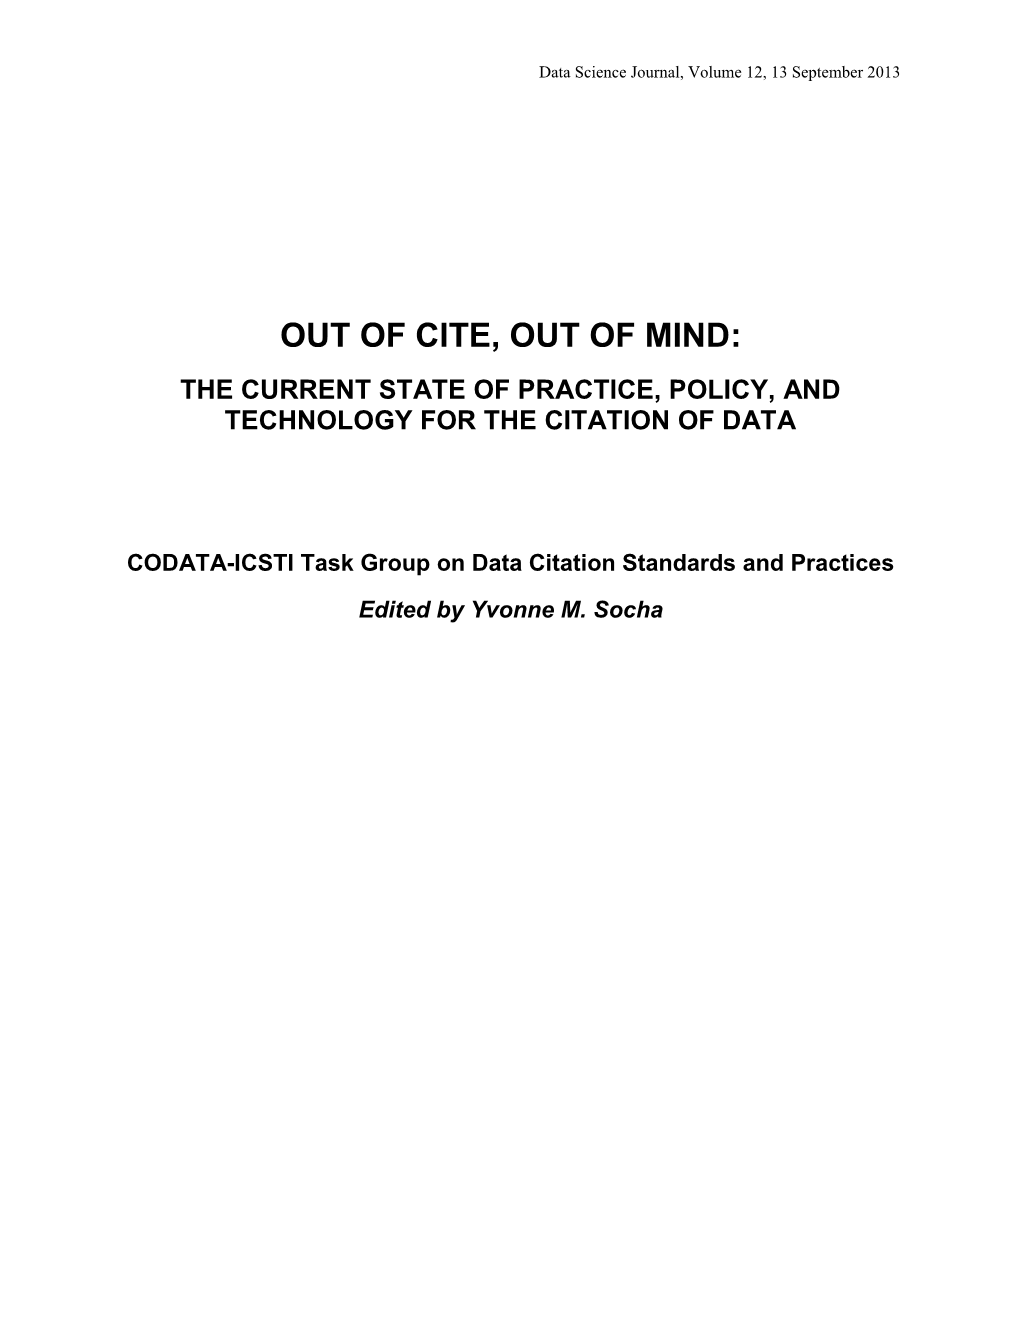 Out of Cite, out of Mind: the Current State of Practice, Policy, and Technology for the Citation of Data